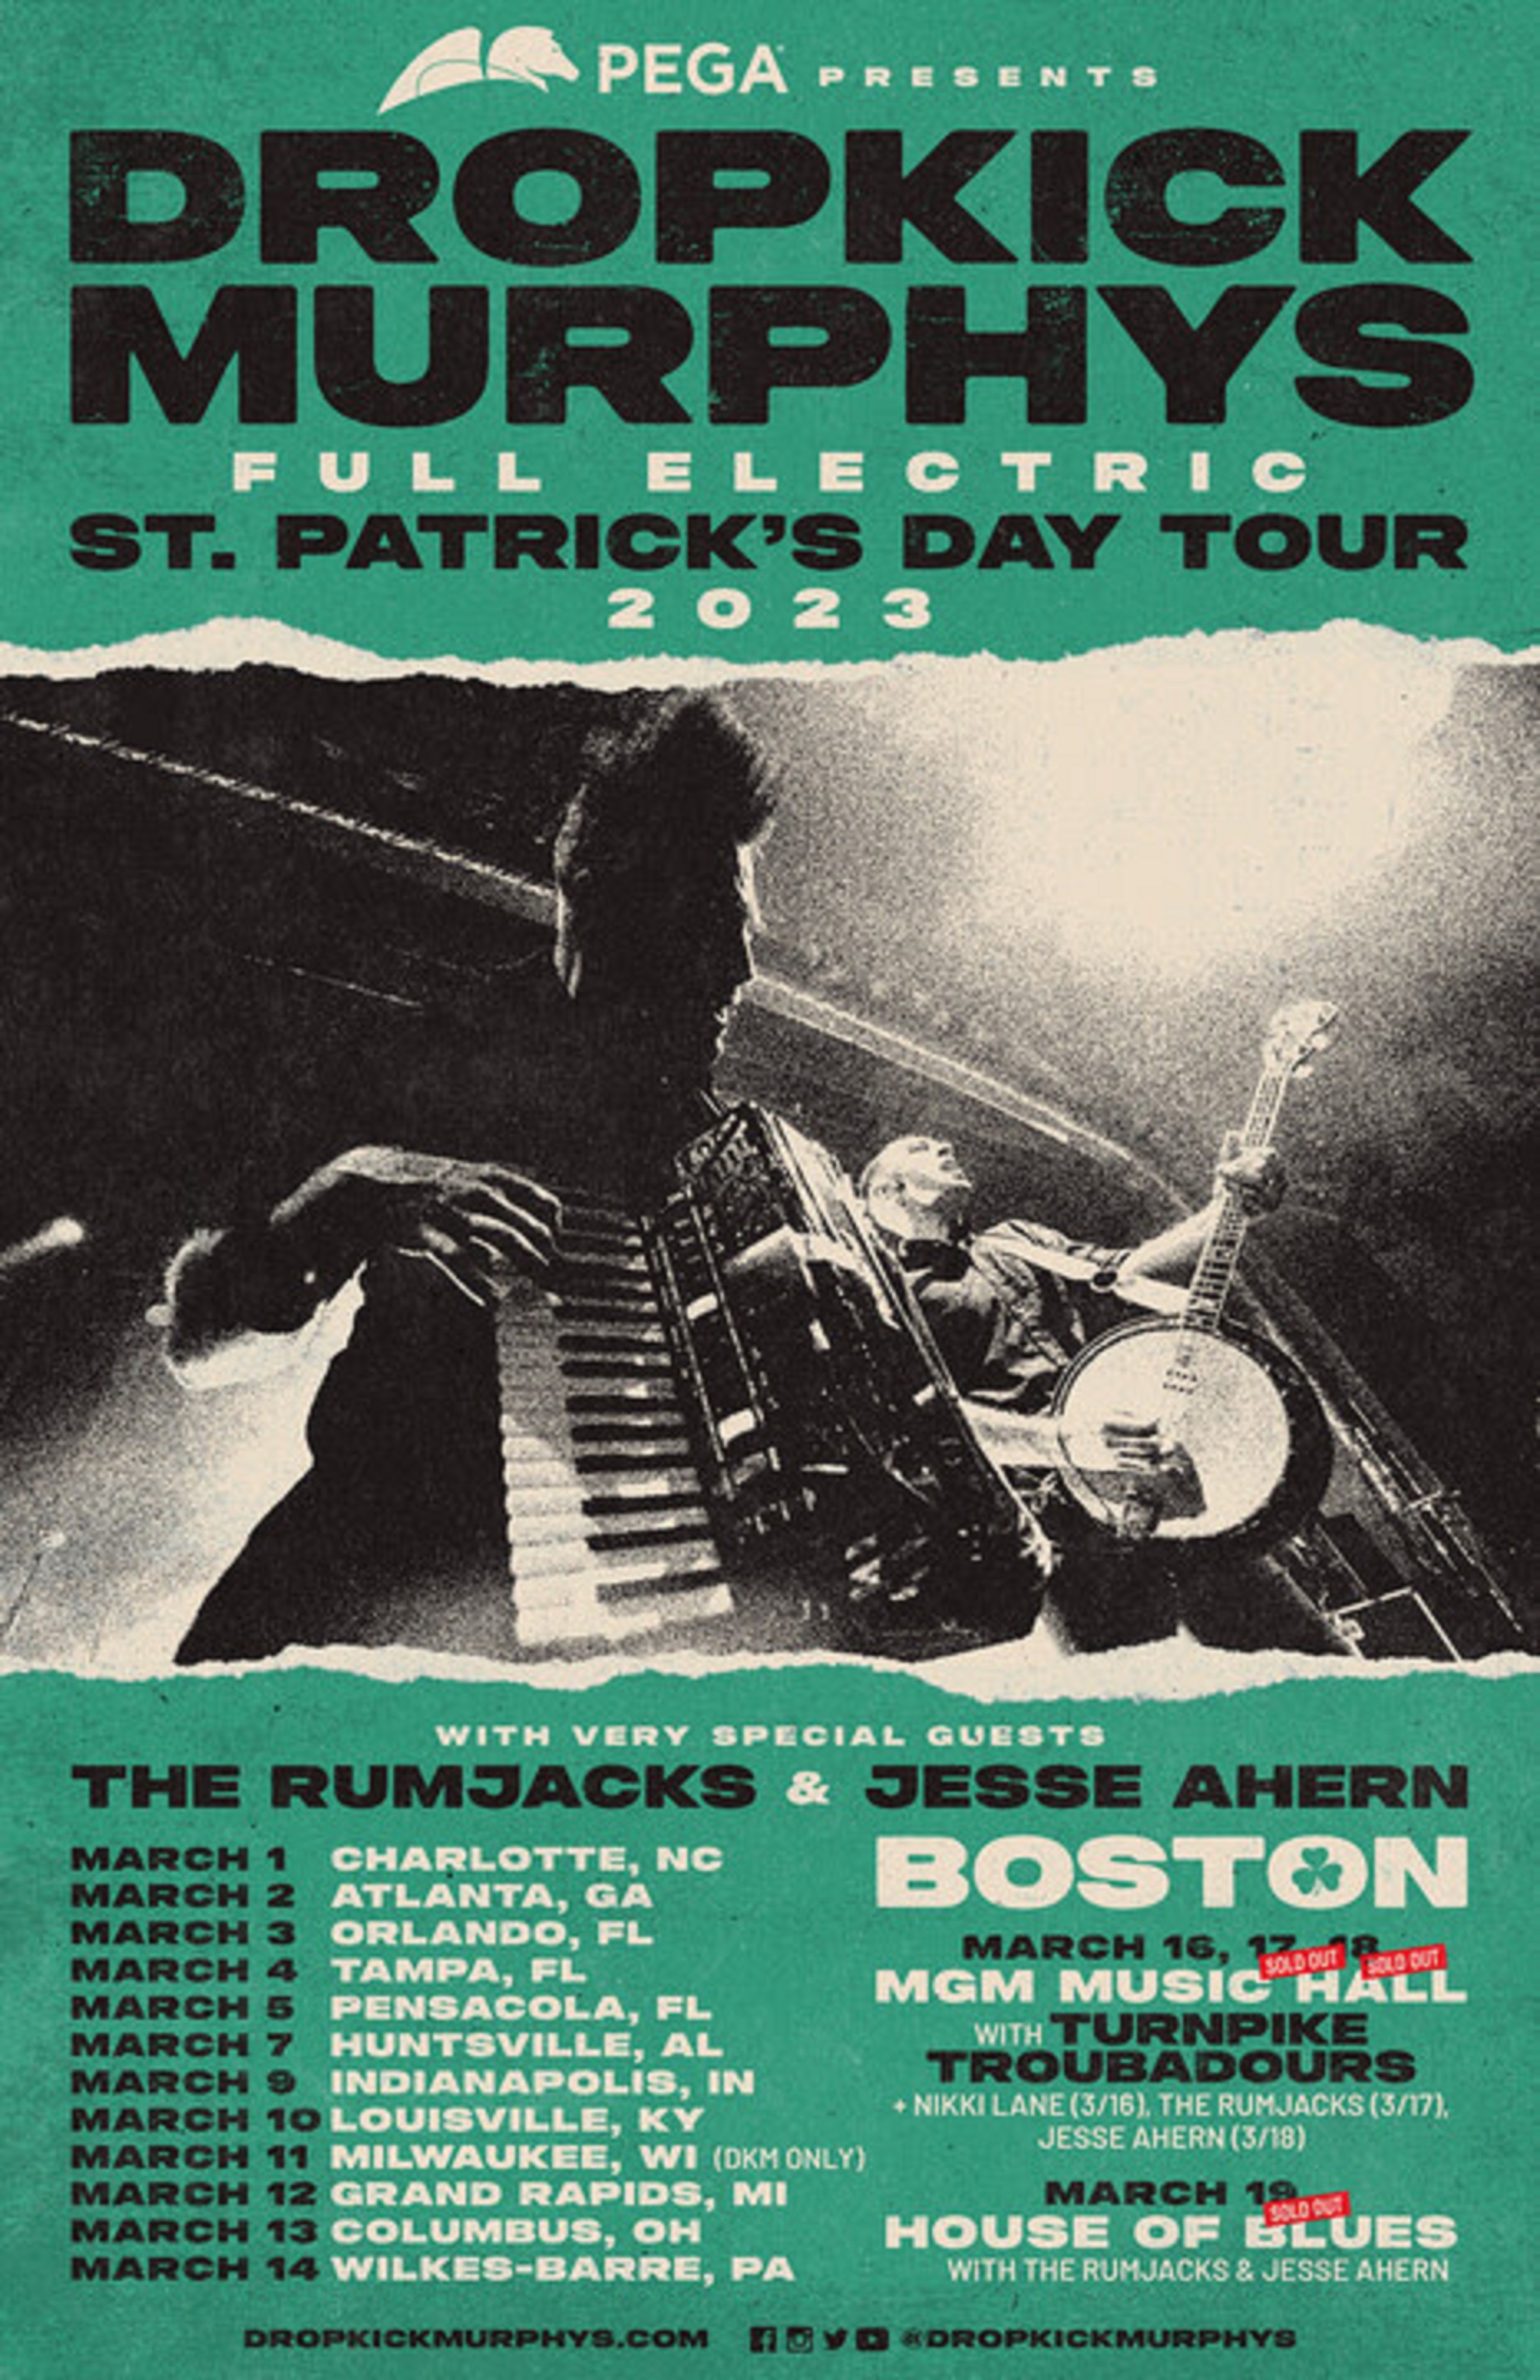 Dropkick Murphys St. Patrick’s Day 2023 Tour Dates Announced; Turnpike Troubadours Join DKM For Shows At MGM Music Hall At Fenway